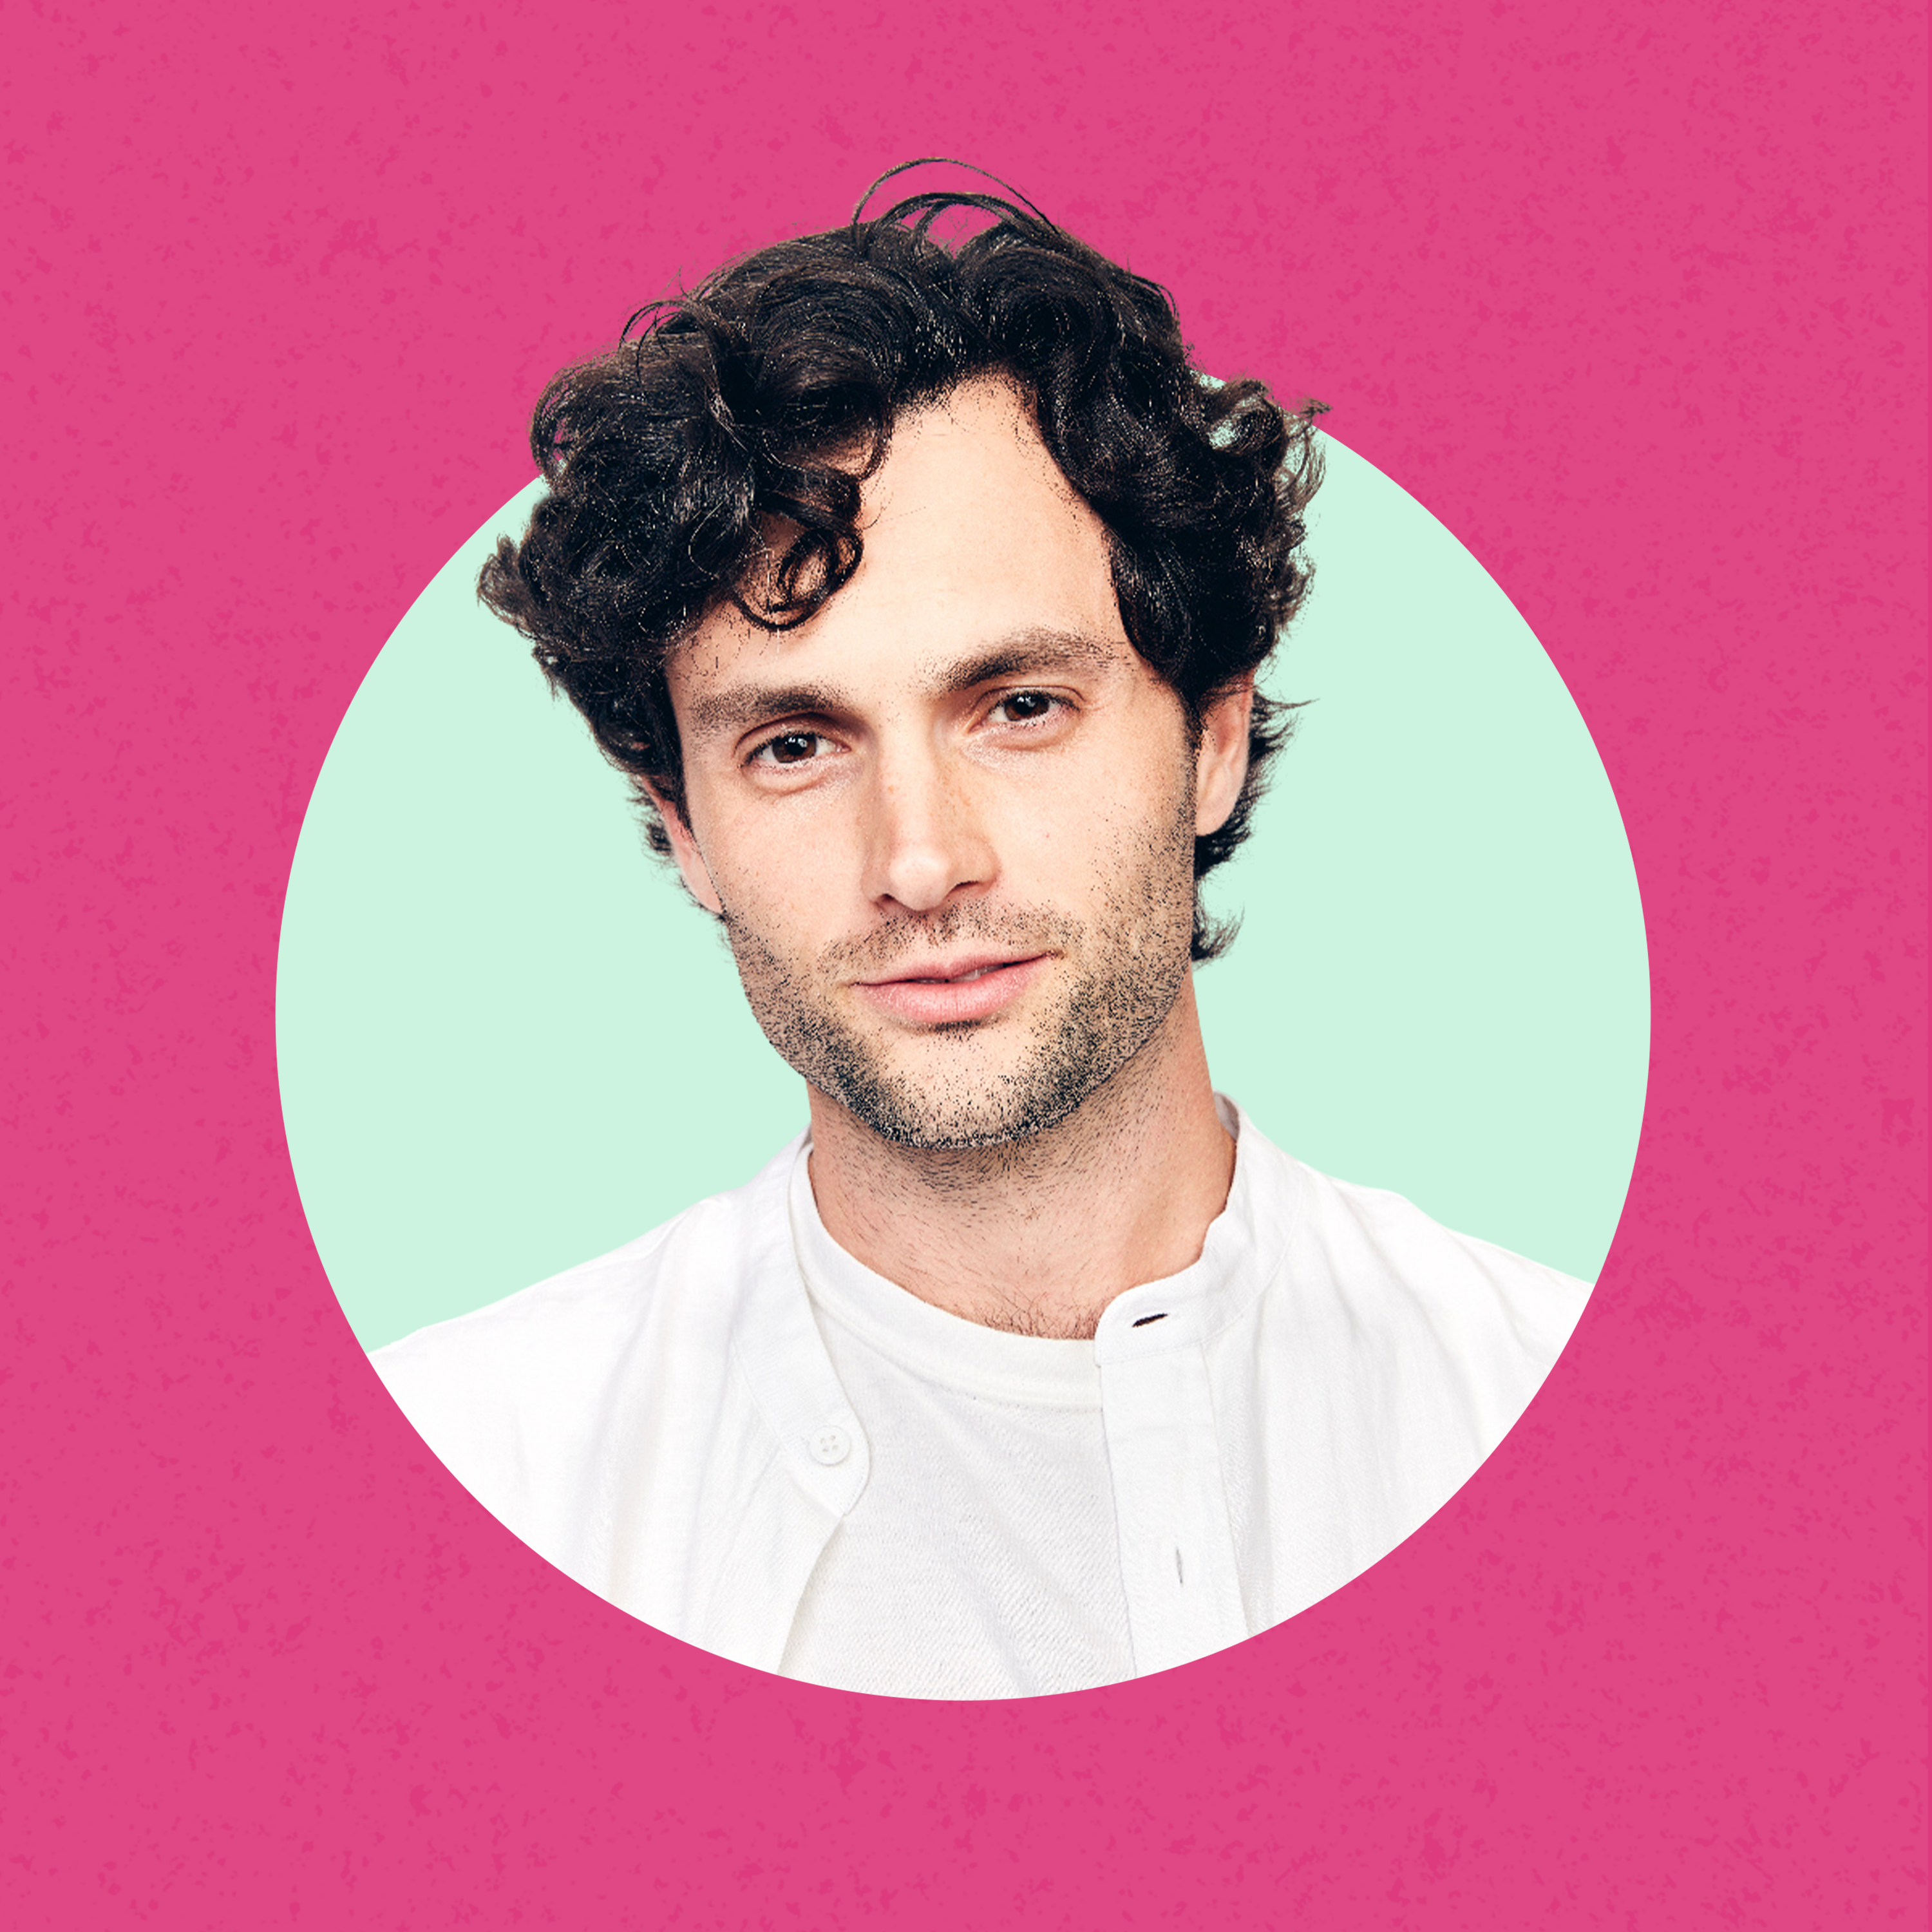 Gossip Girl or Too Cool for School? (with Penn Badgley)